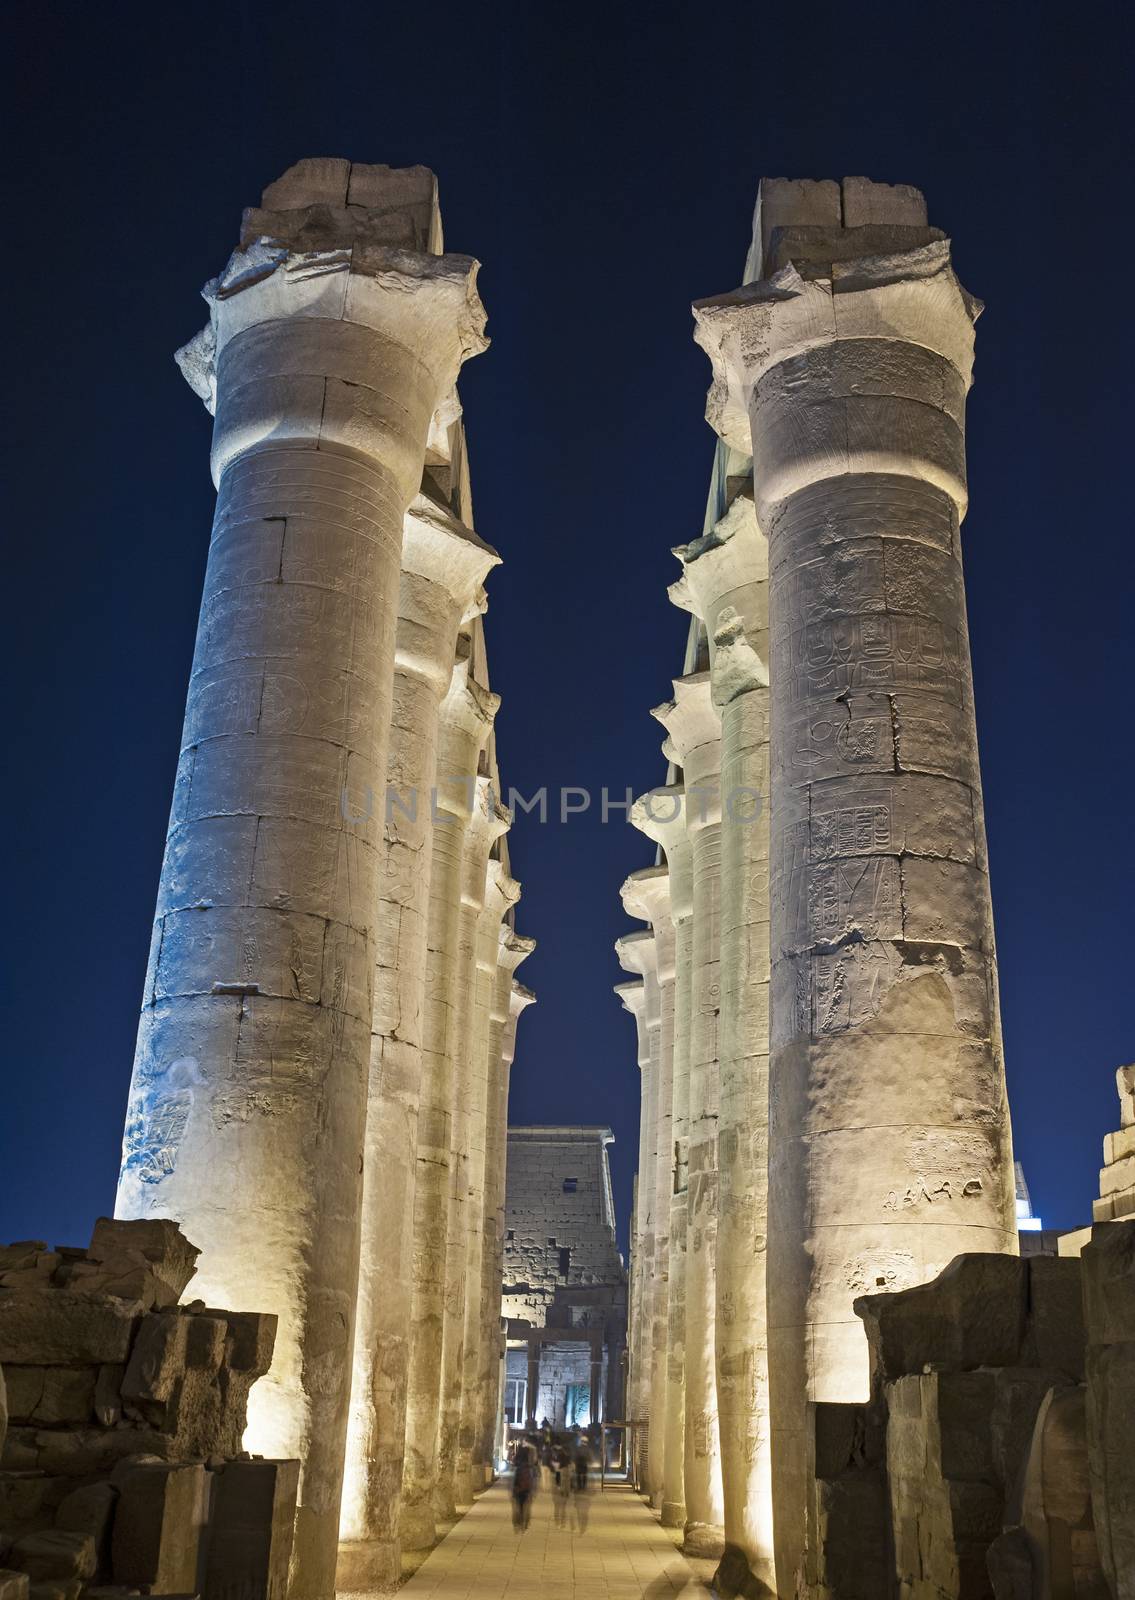 Large columns in hypostyle hall at ancient egyptian Luxor Temple lit up during night